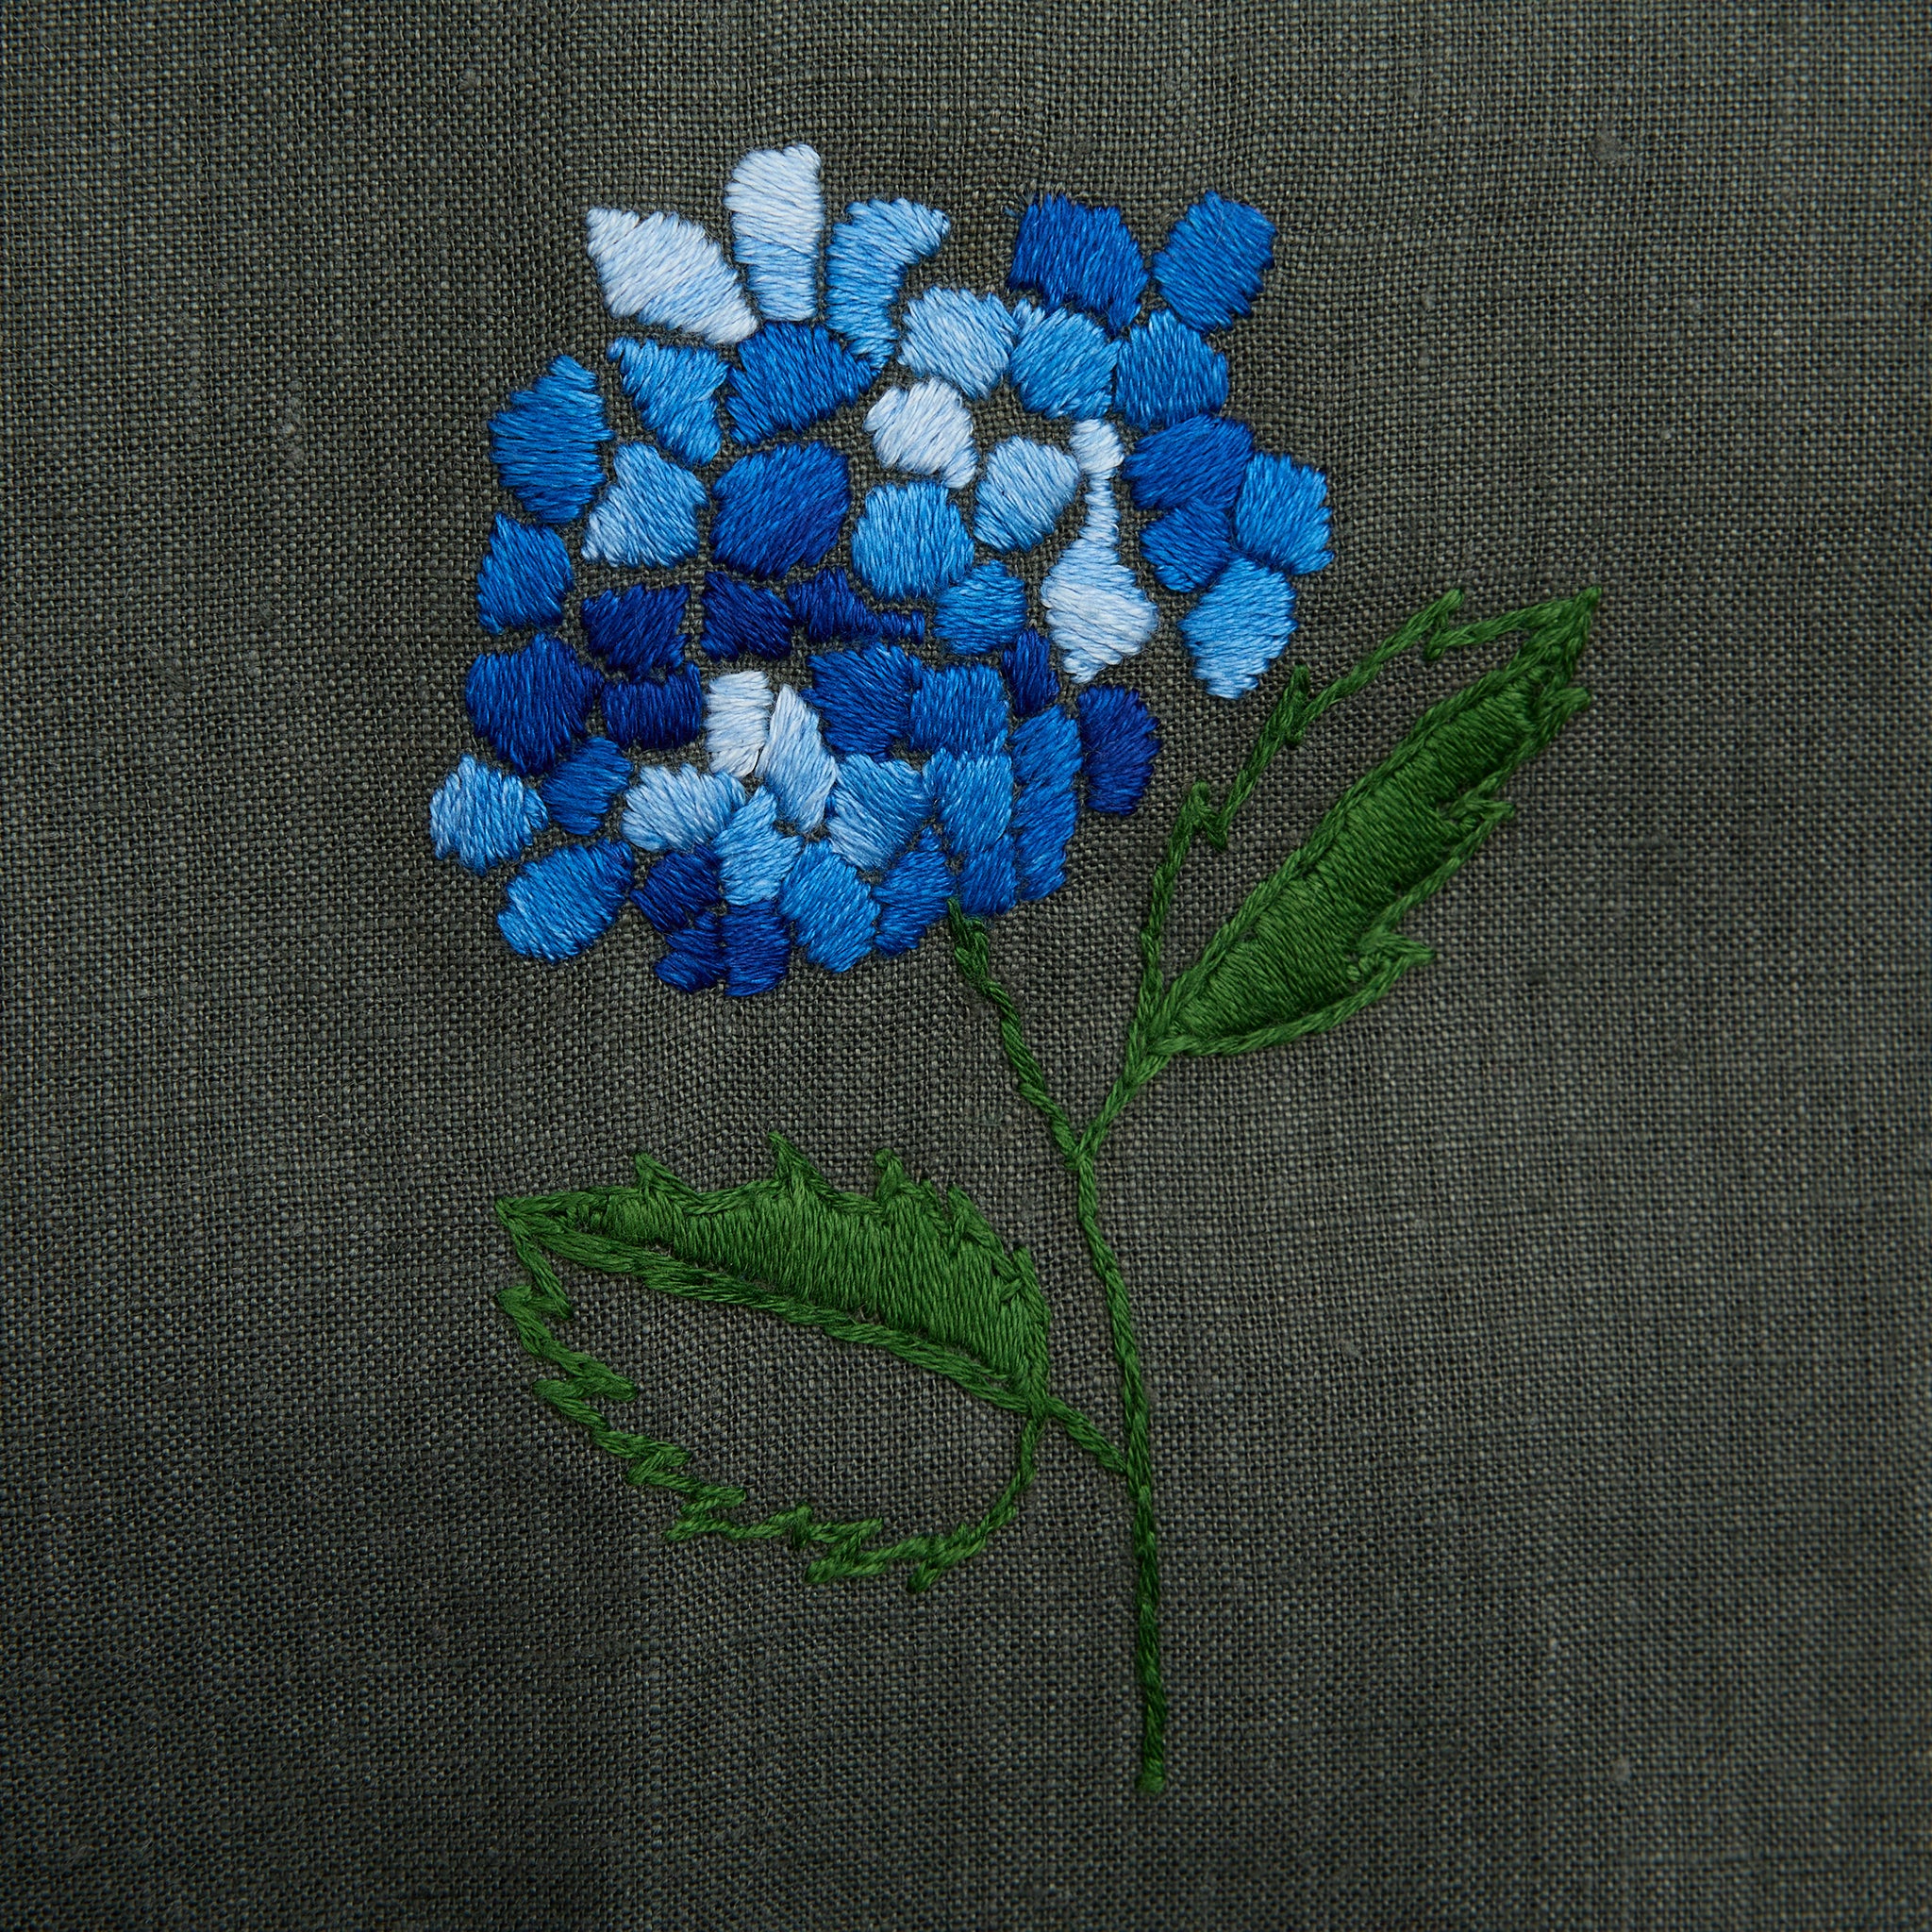 Tablecloth No. 20, hand-embroidered with blue hydrangeas